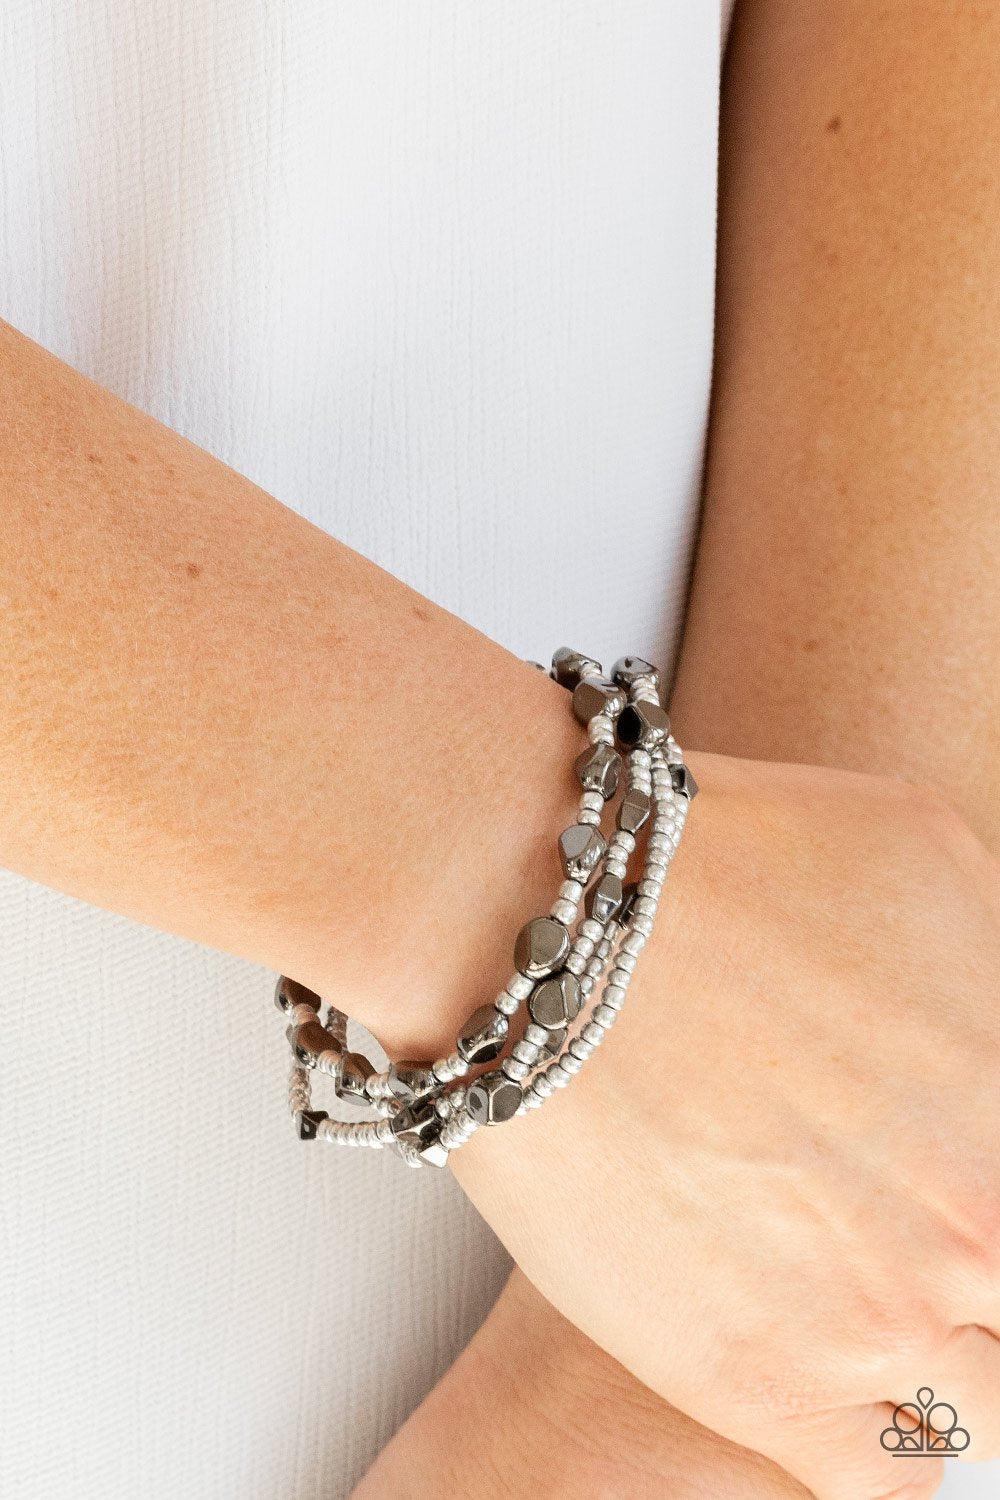 Fashionably Faceted Multi Silver and Gunmetal Bracelet Set - Paparazzi Accessories- lightbox - CarasShop.com - $5 Jewelry by Cara Jewels